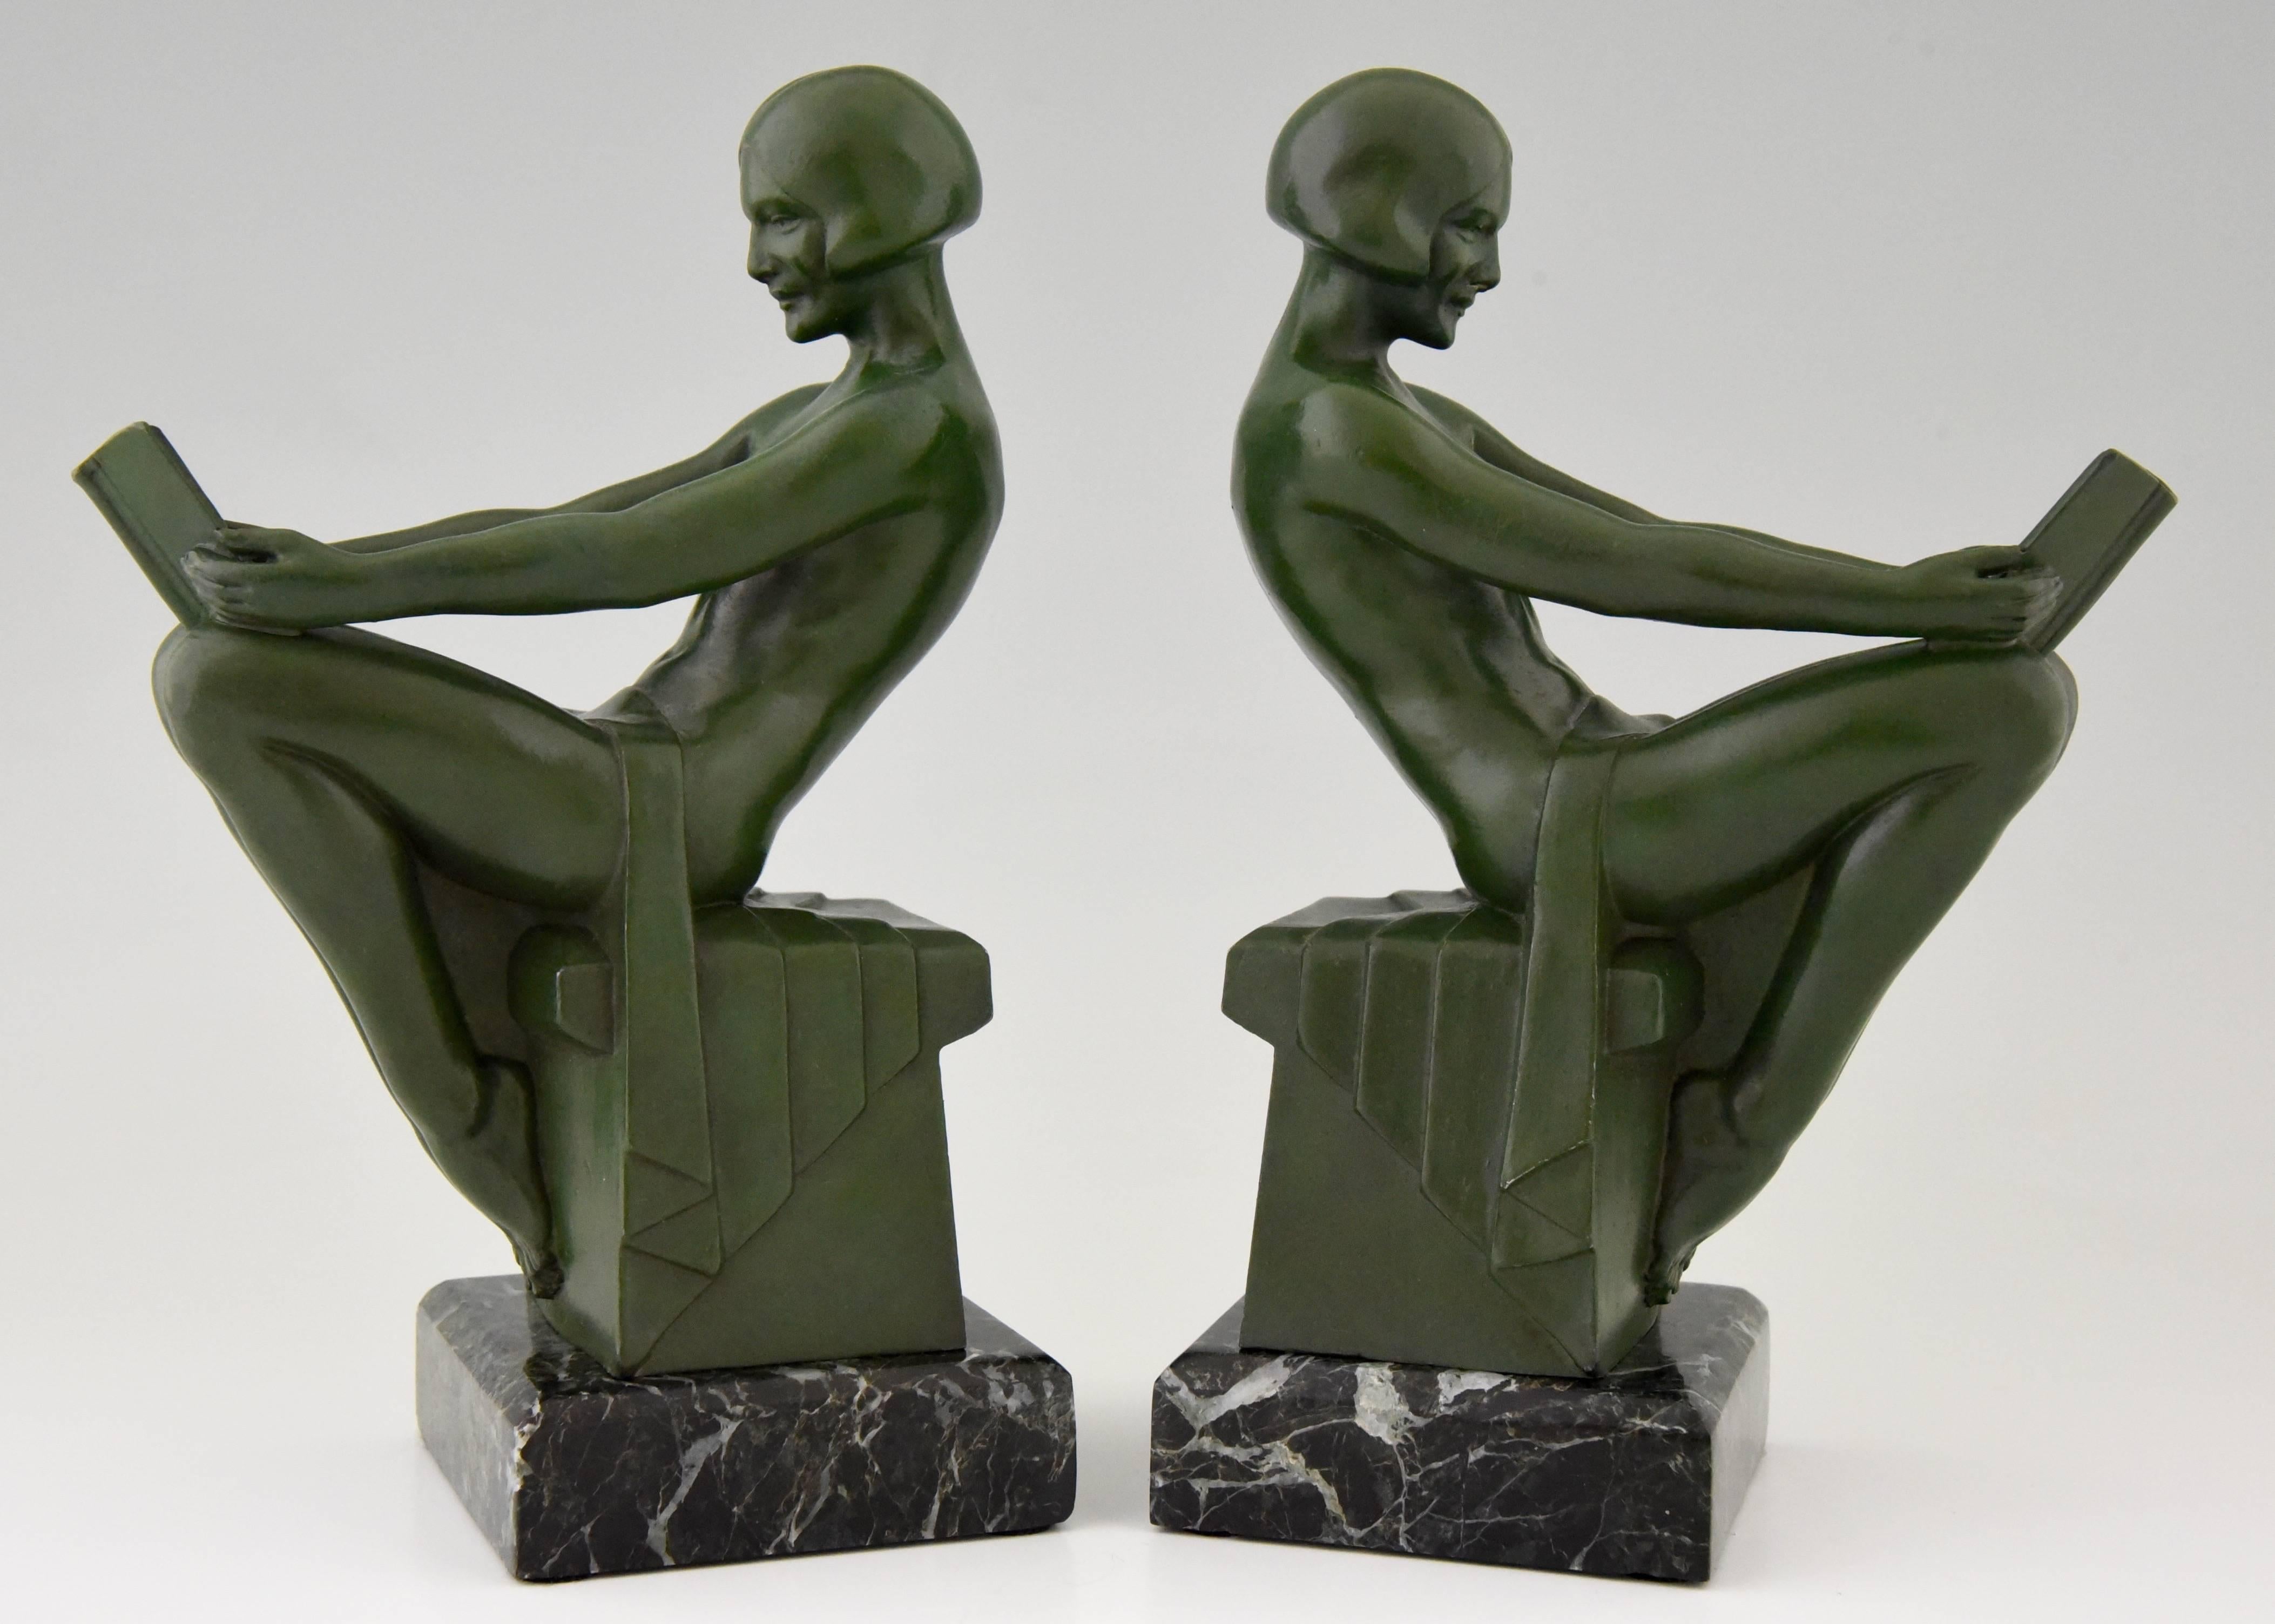 Elegant pair of Art Deco bookends with reading nudes in patinated metal on a green marble base by the famous French artist Max Le Verrier. 

Artist / Maker:
Max Le Verrier.
Signature / Marks:
M. Le Verrier. 
Style:
Art Deco.